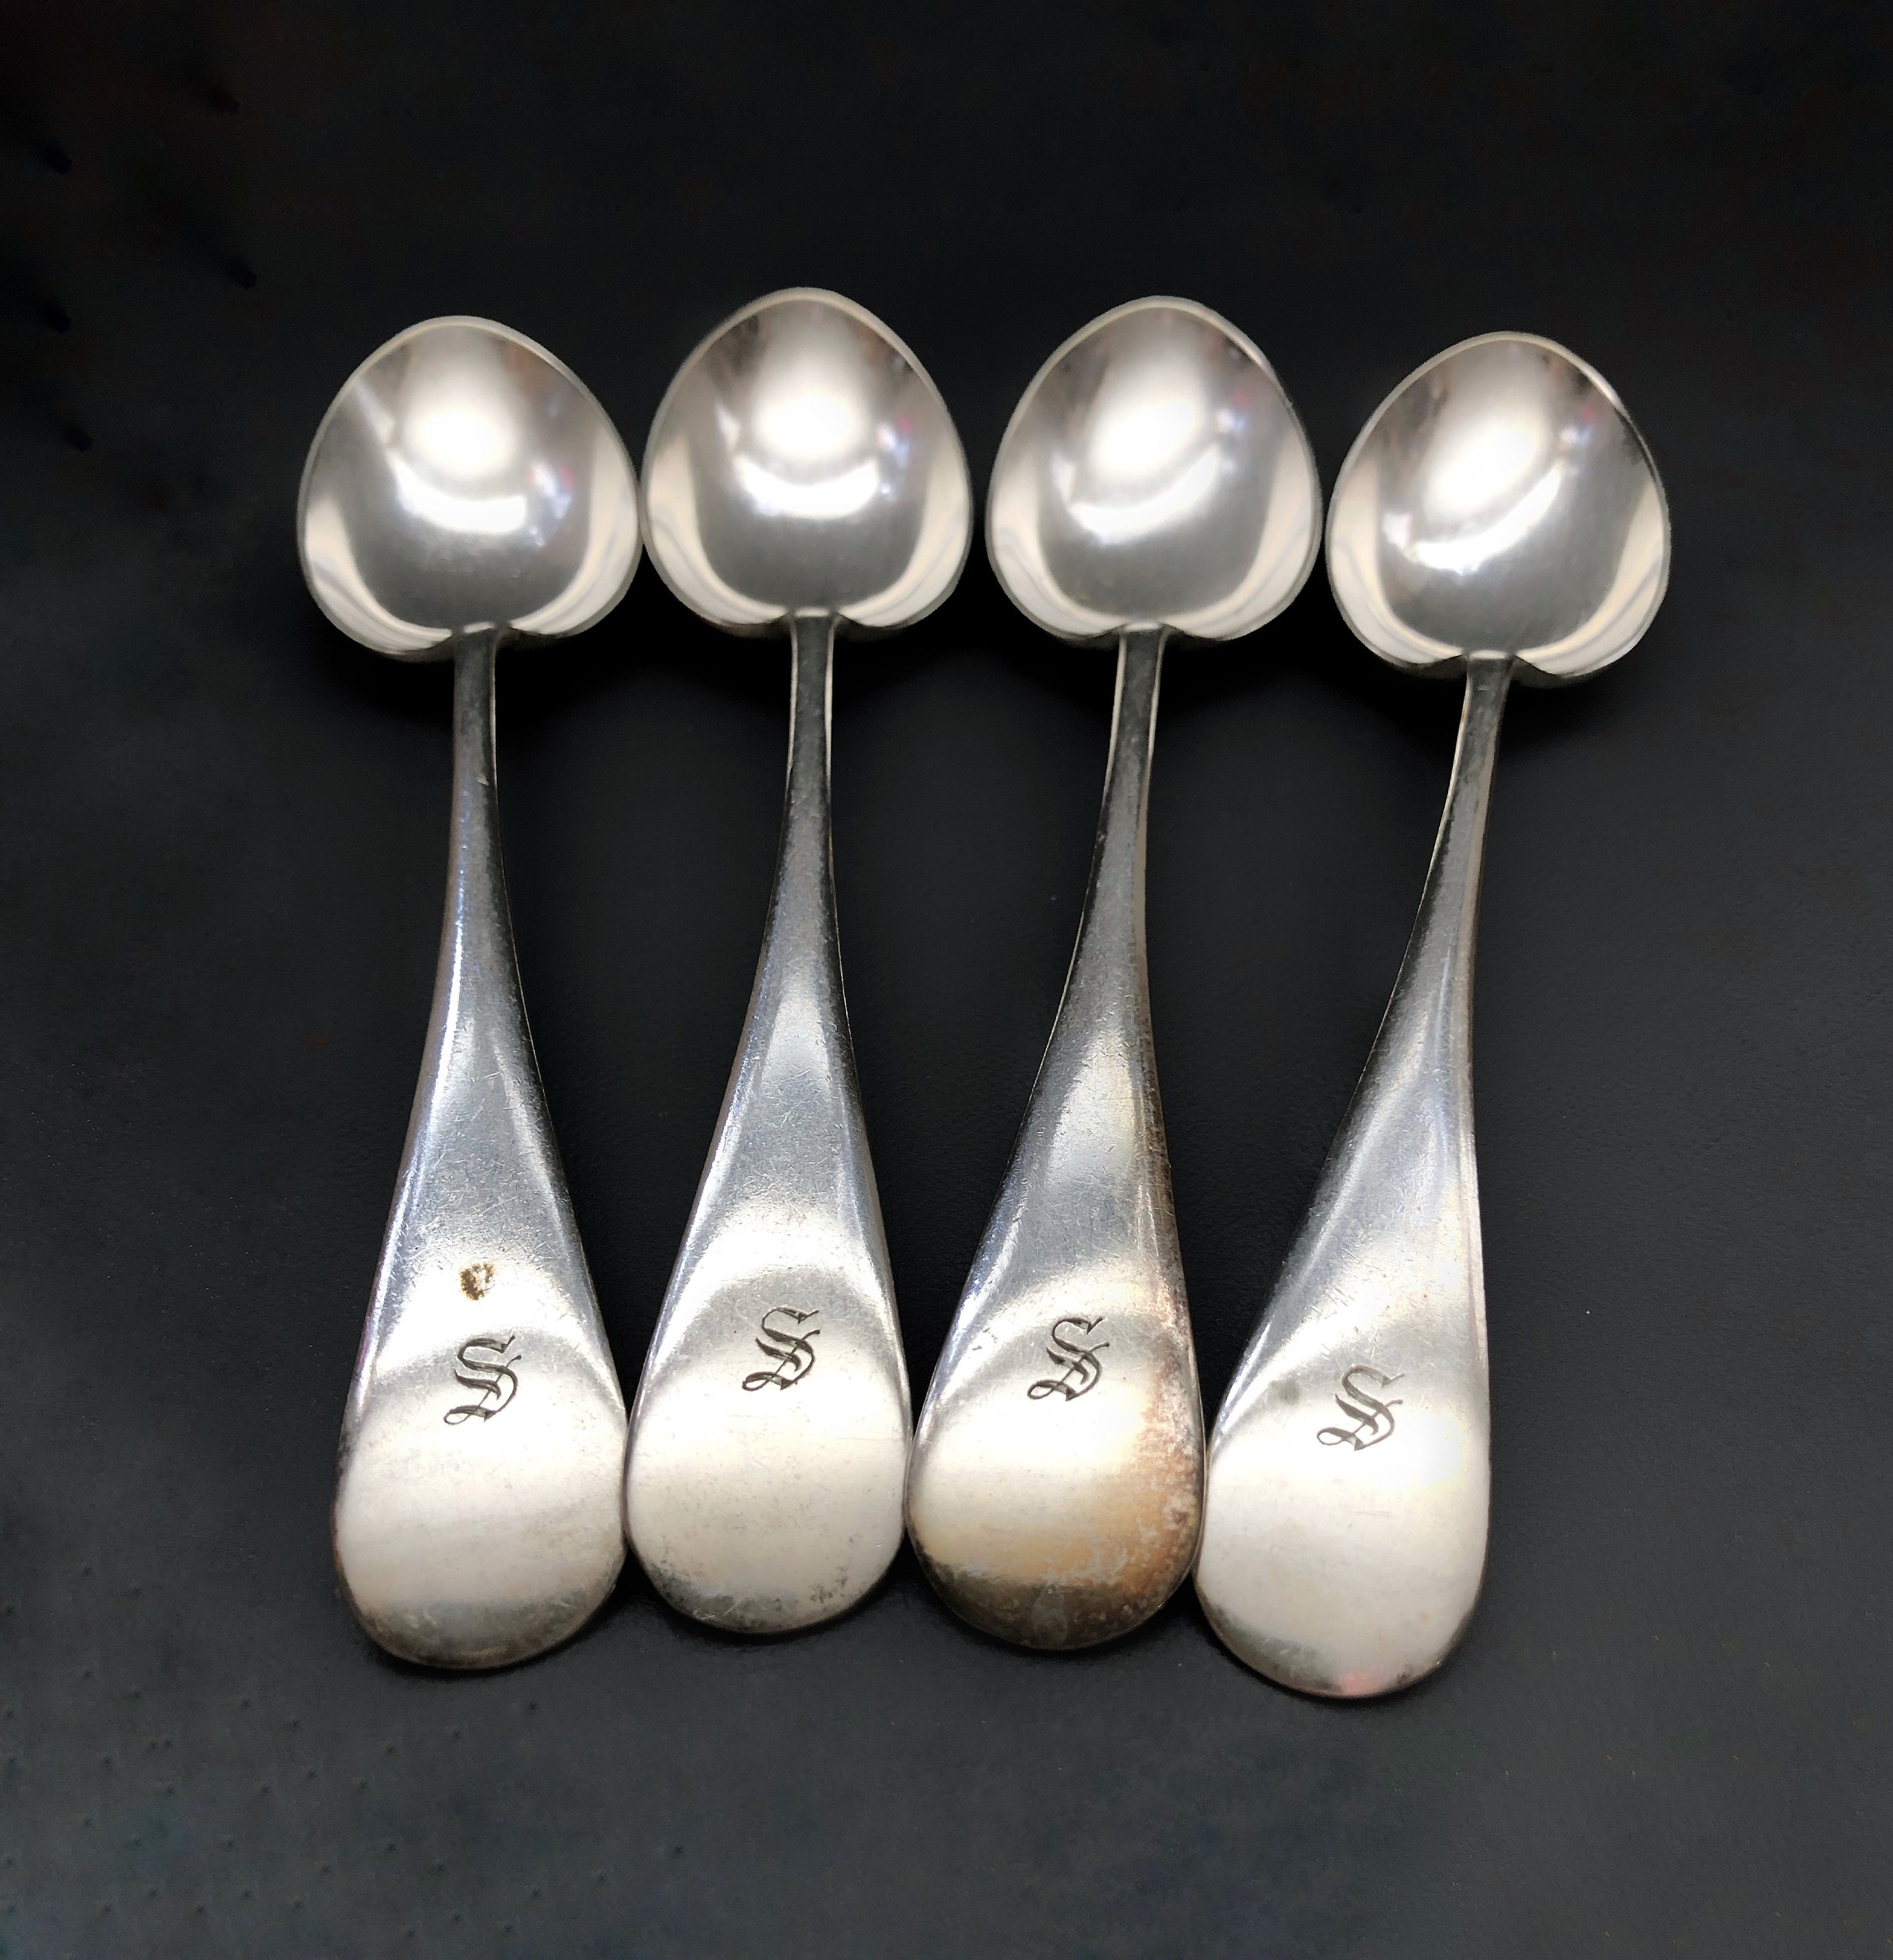 Monogram Serving Spoons, Antique Vegetable Soup Dining & Serving, Collectable Cutlery, Collectible Flatware